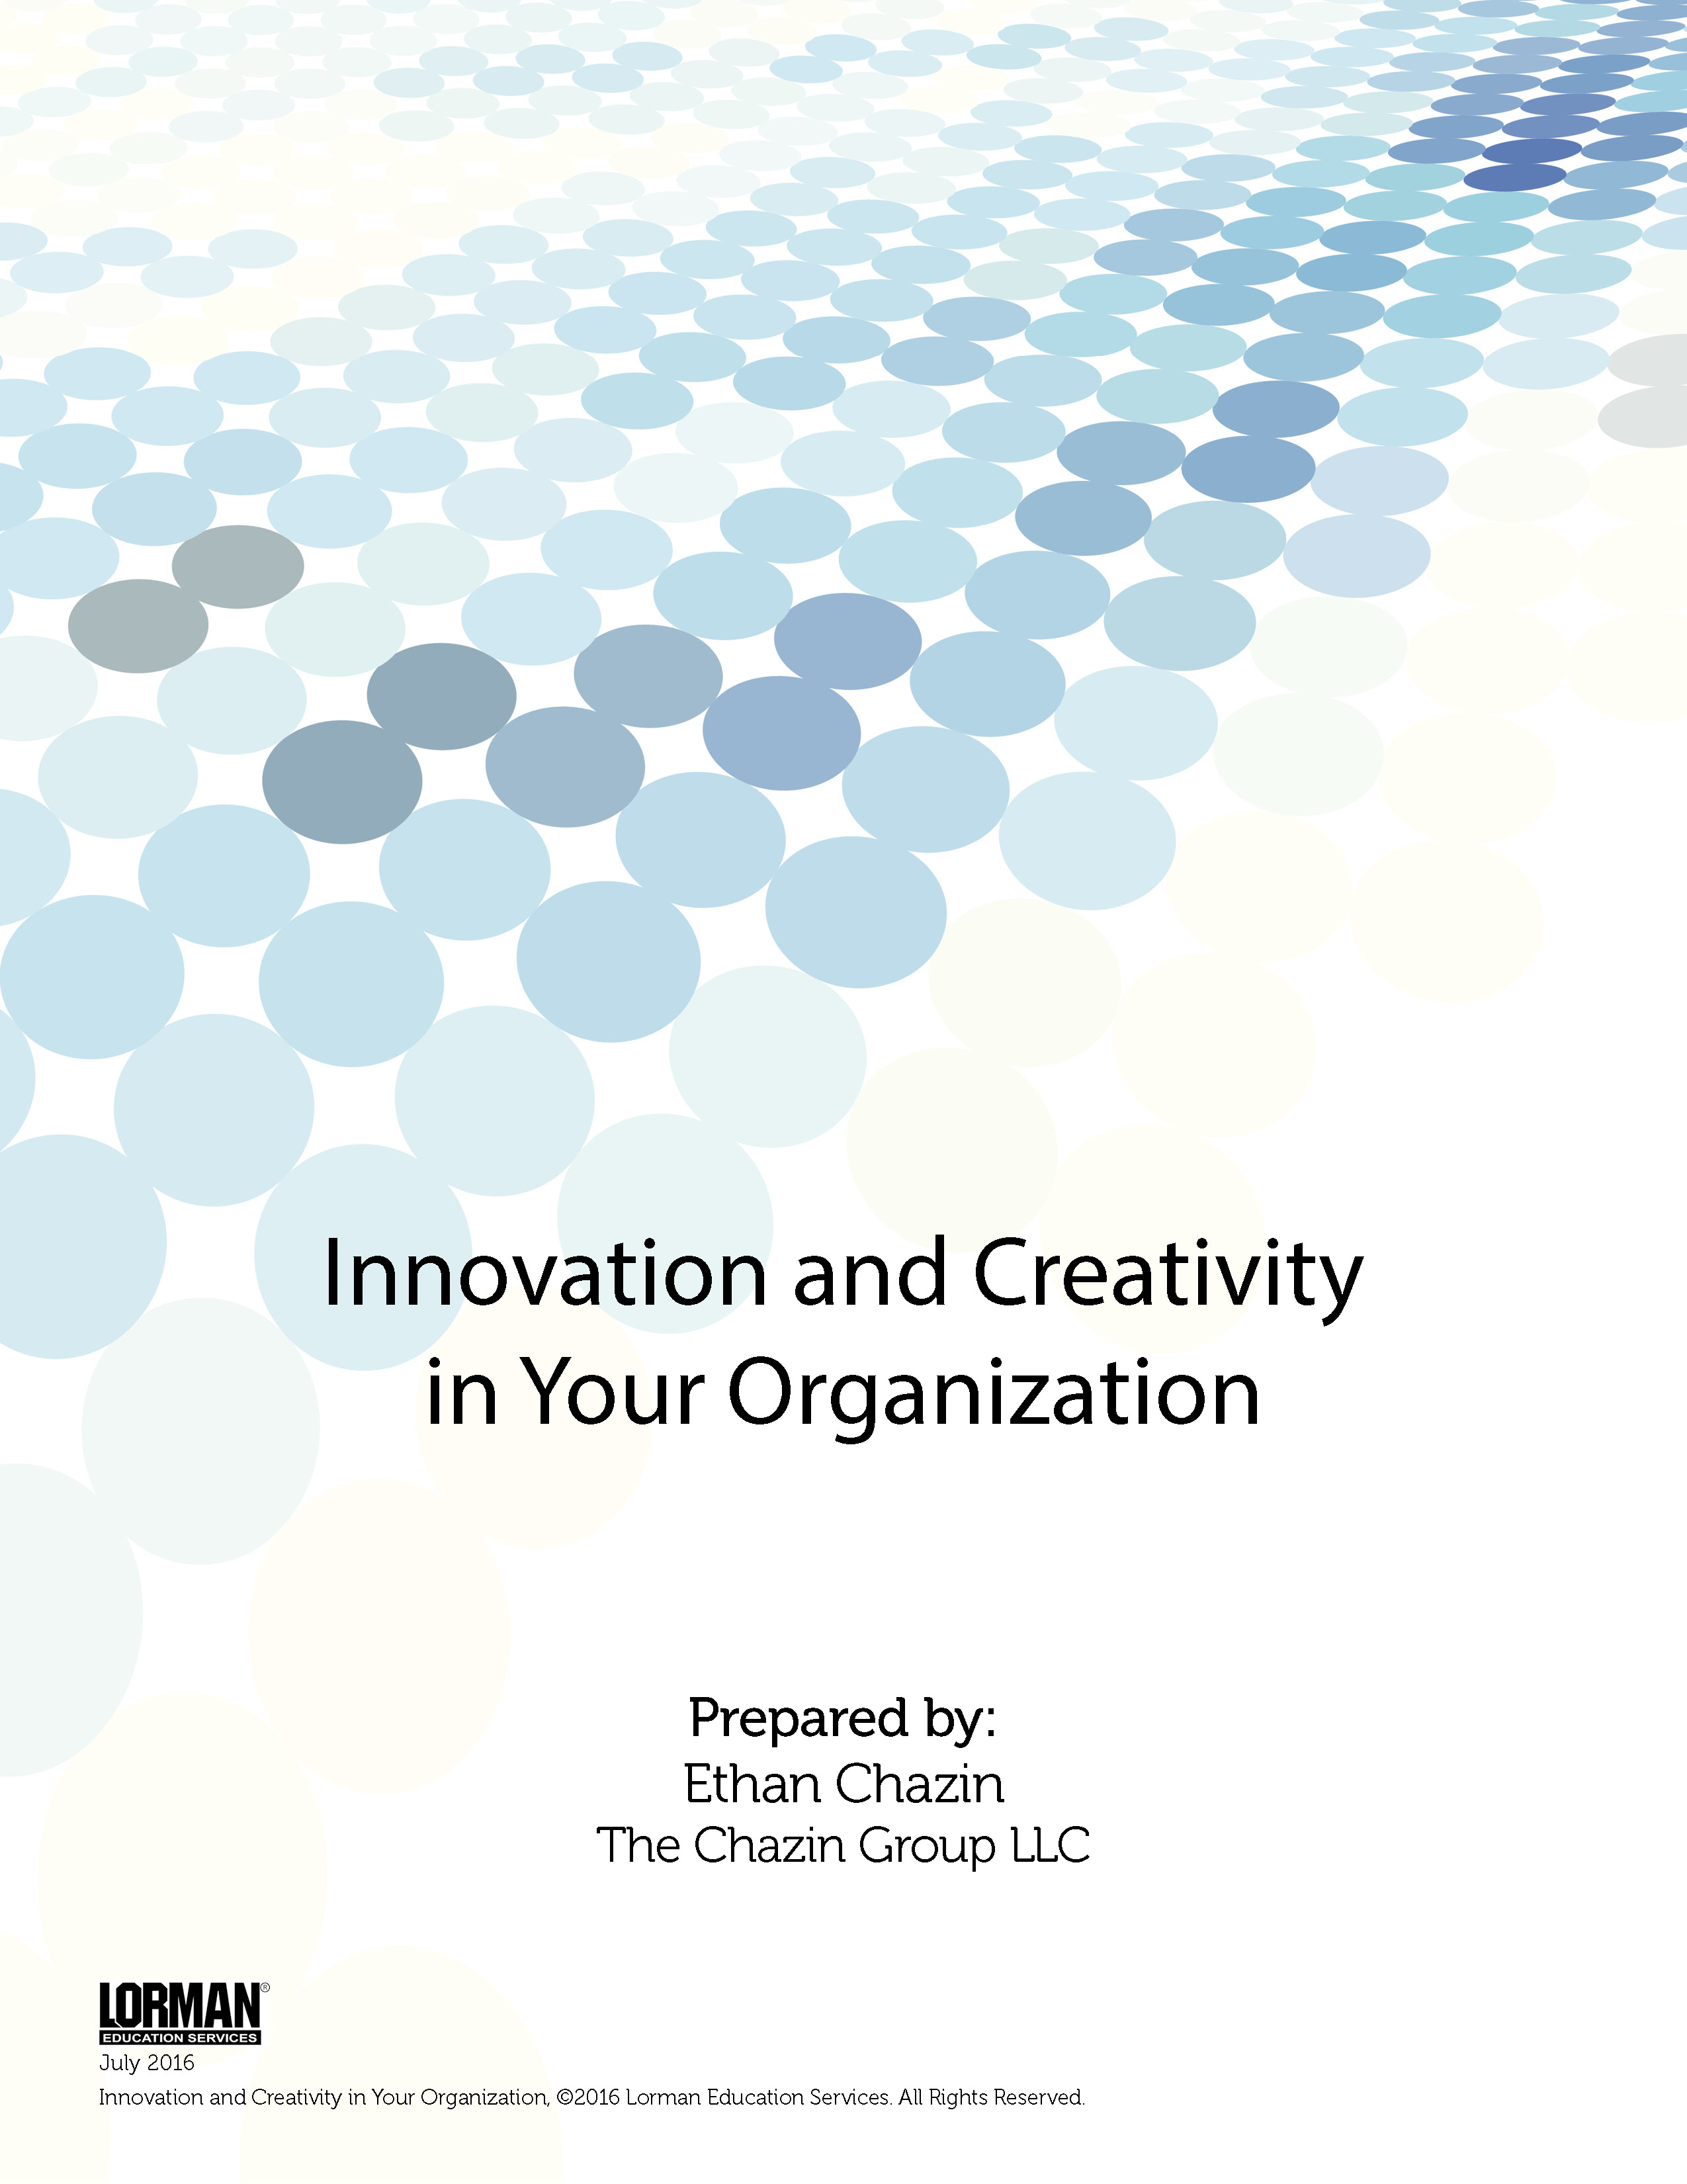 Innovation and Creativity in Your Organization